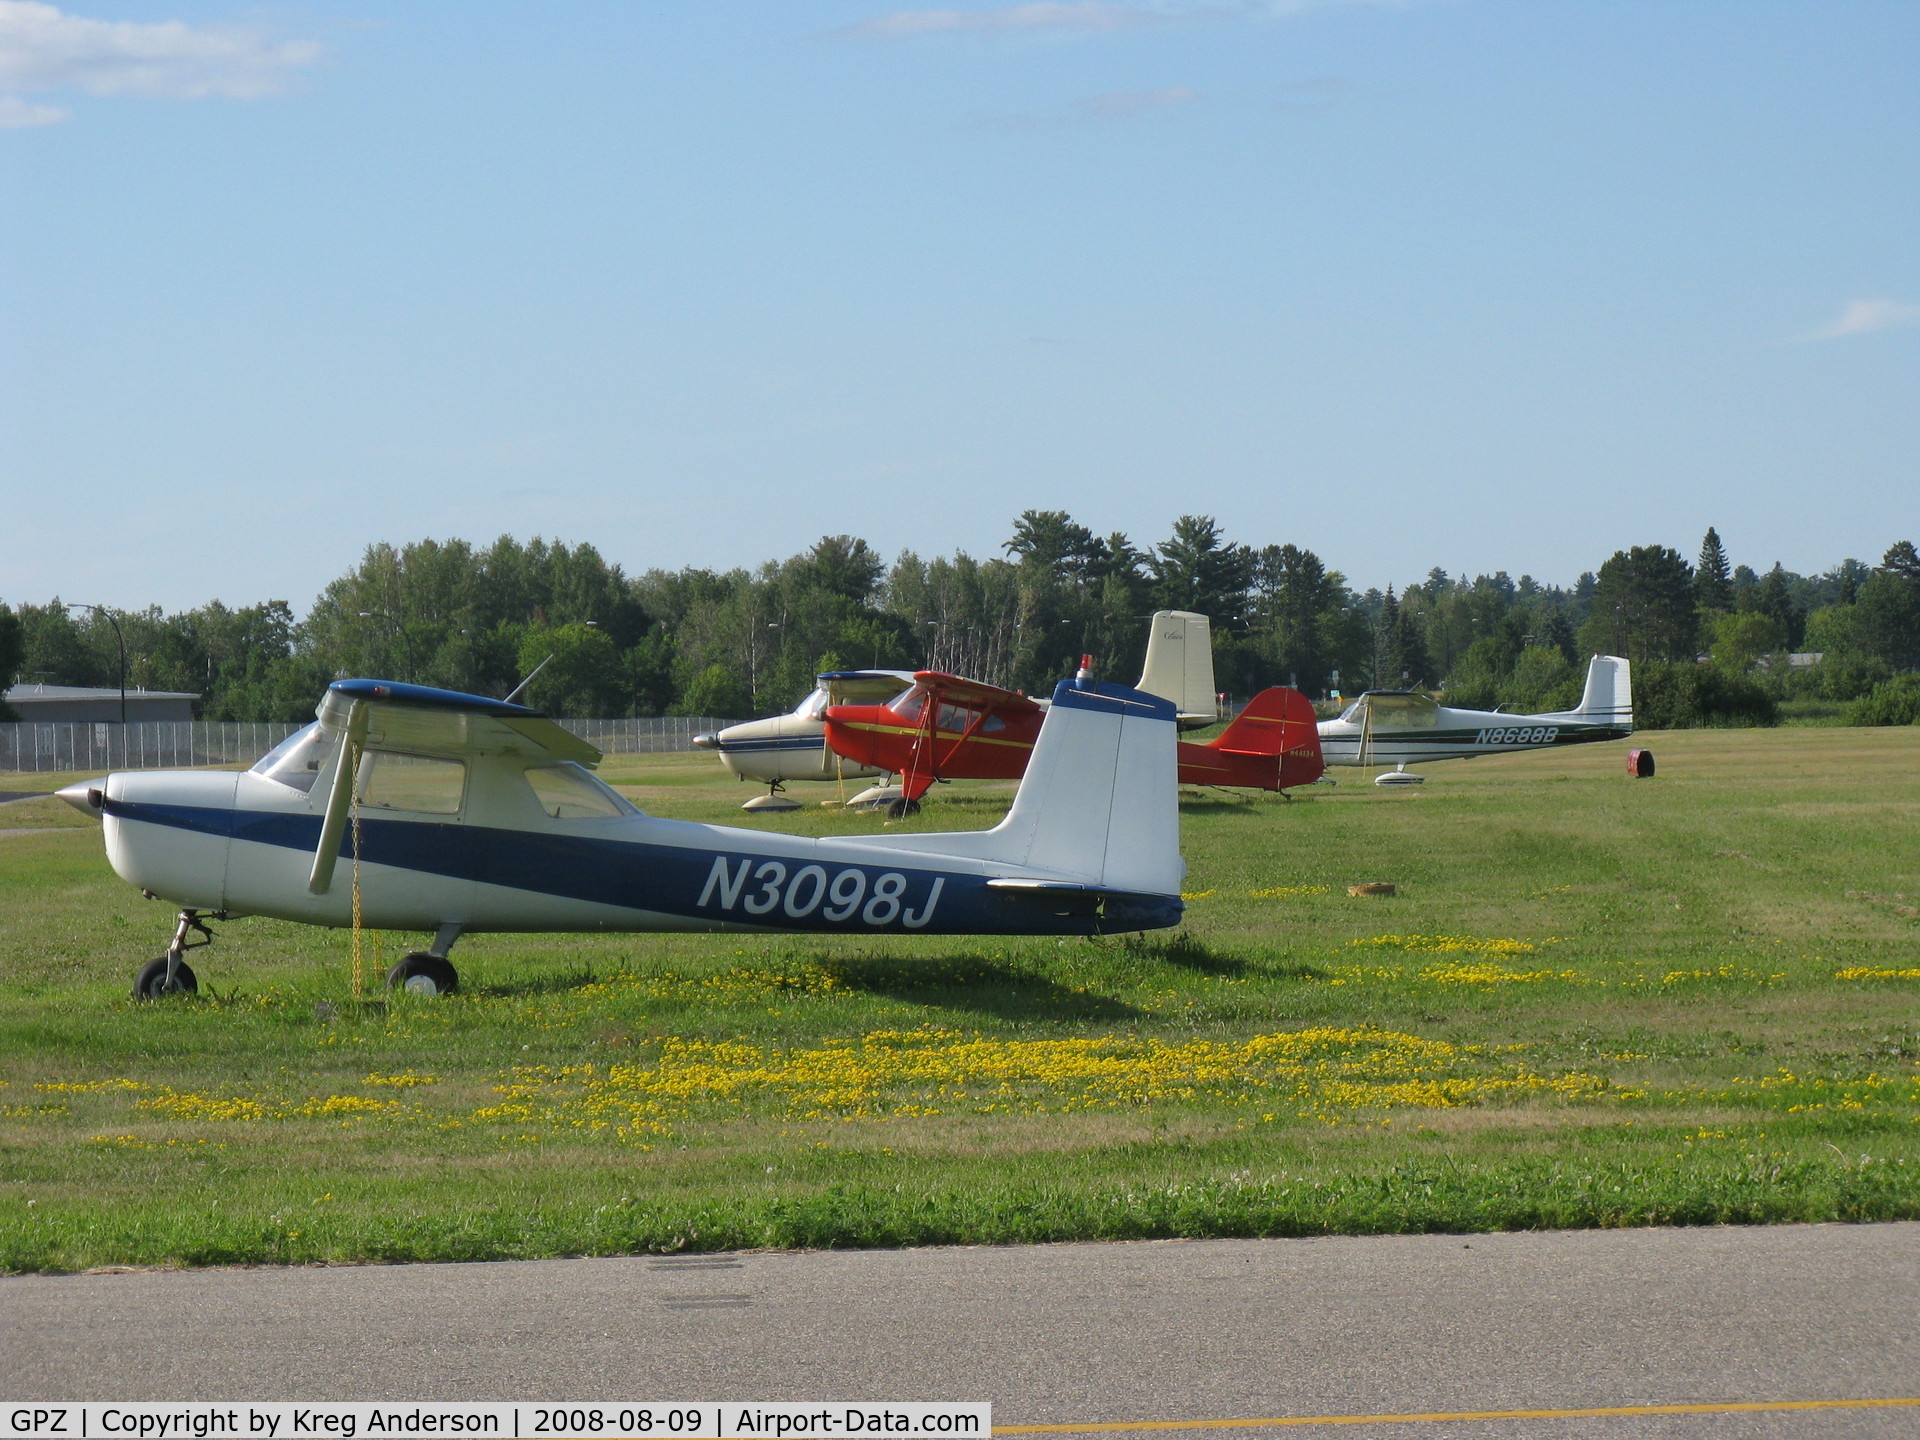 Grand Rapids/itasca Co-gordon Newstrom Fld Airport (GPZ) - A grassy area complete with tied down aircraft. Seems...nostalgic :)